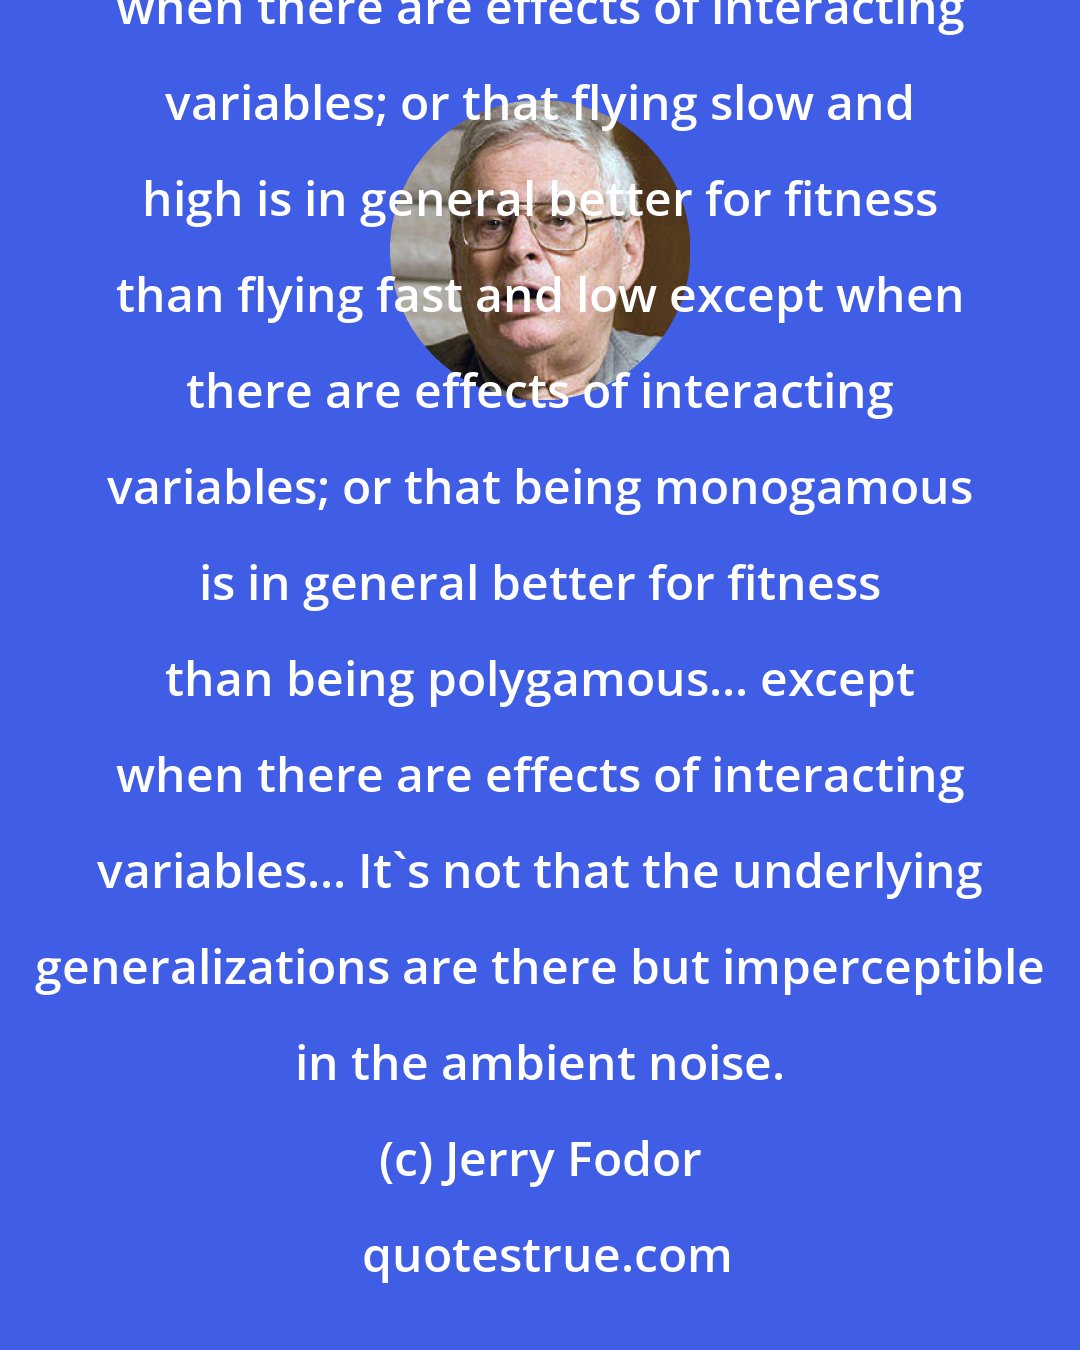 Jerry Fodor: It simply isn't true, for example, that being big is in general better for fitness than being small except when there are effects of interacting variables; or that flying slow and high is in general better for fitness than flying fast and low except when there are effects of interacting variables; or that being monogamous is in general better for fitness than being polygamous... except when there are effects of interacting variables... It's not that the underlying generalizations are there but imperceptible in the ambient noise.